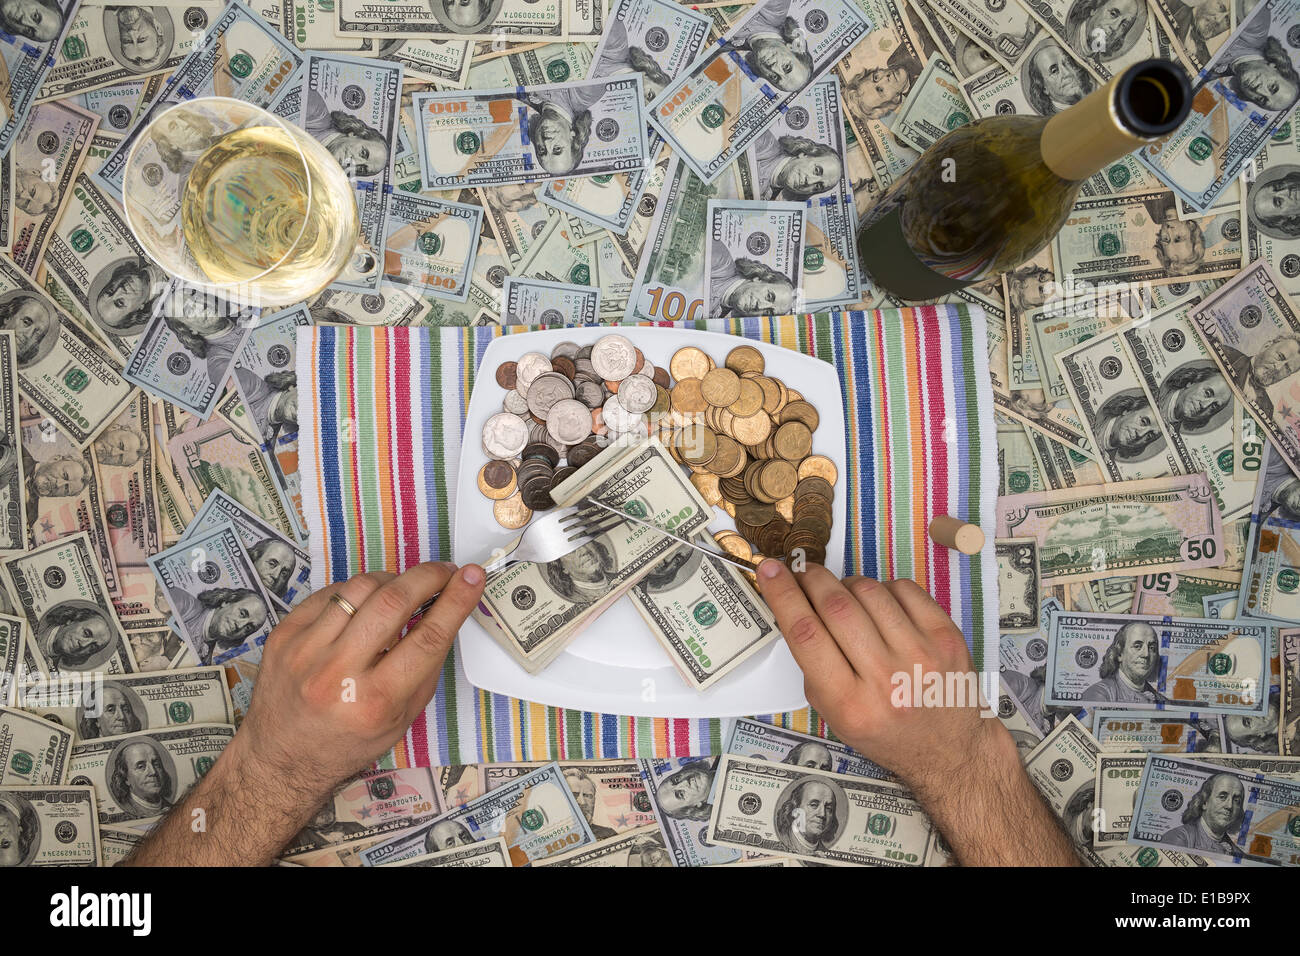 Conceptual image of a man eating money through extravagance with an overhead view of him sitting at table covered in 100 dollar Stock Photo